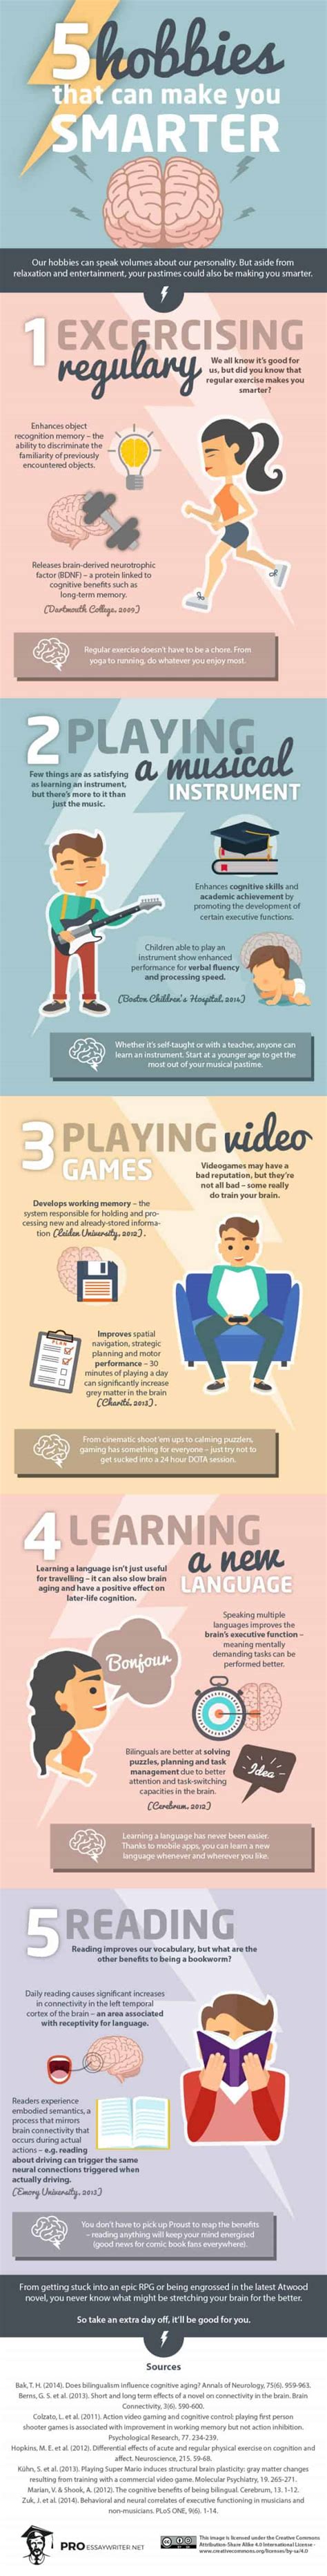 5 Hobbies That Will Make You Smarter Daily Infographic